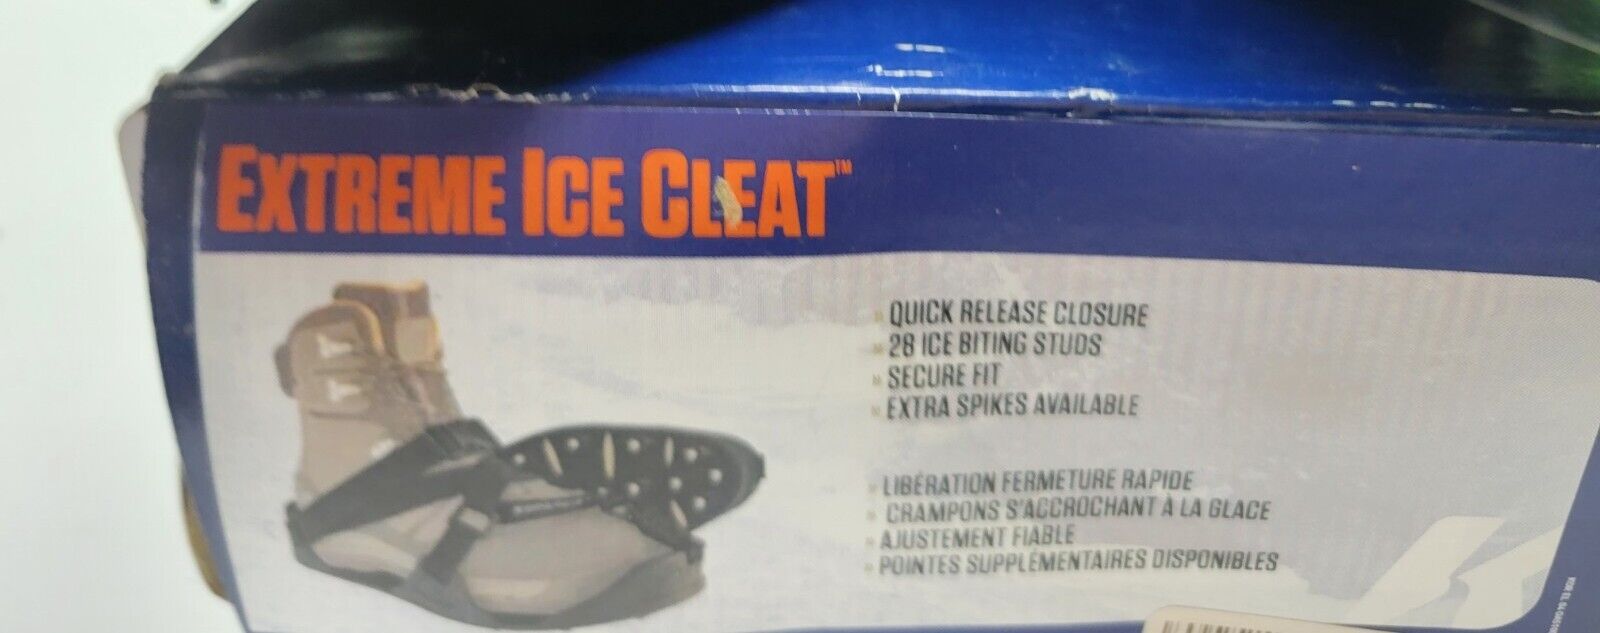 New Open Box Korkers Extreme Ice Cleat, Size Medium 7.5/9.5 Fishing Spikes studs